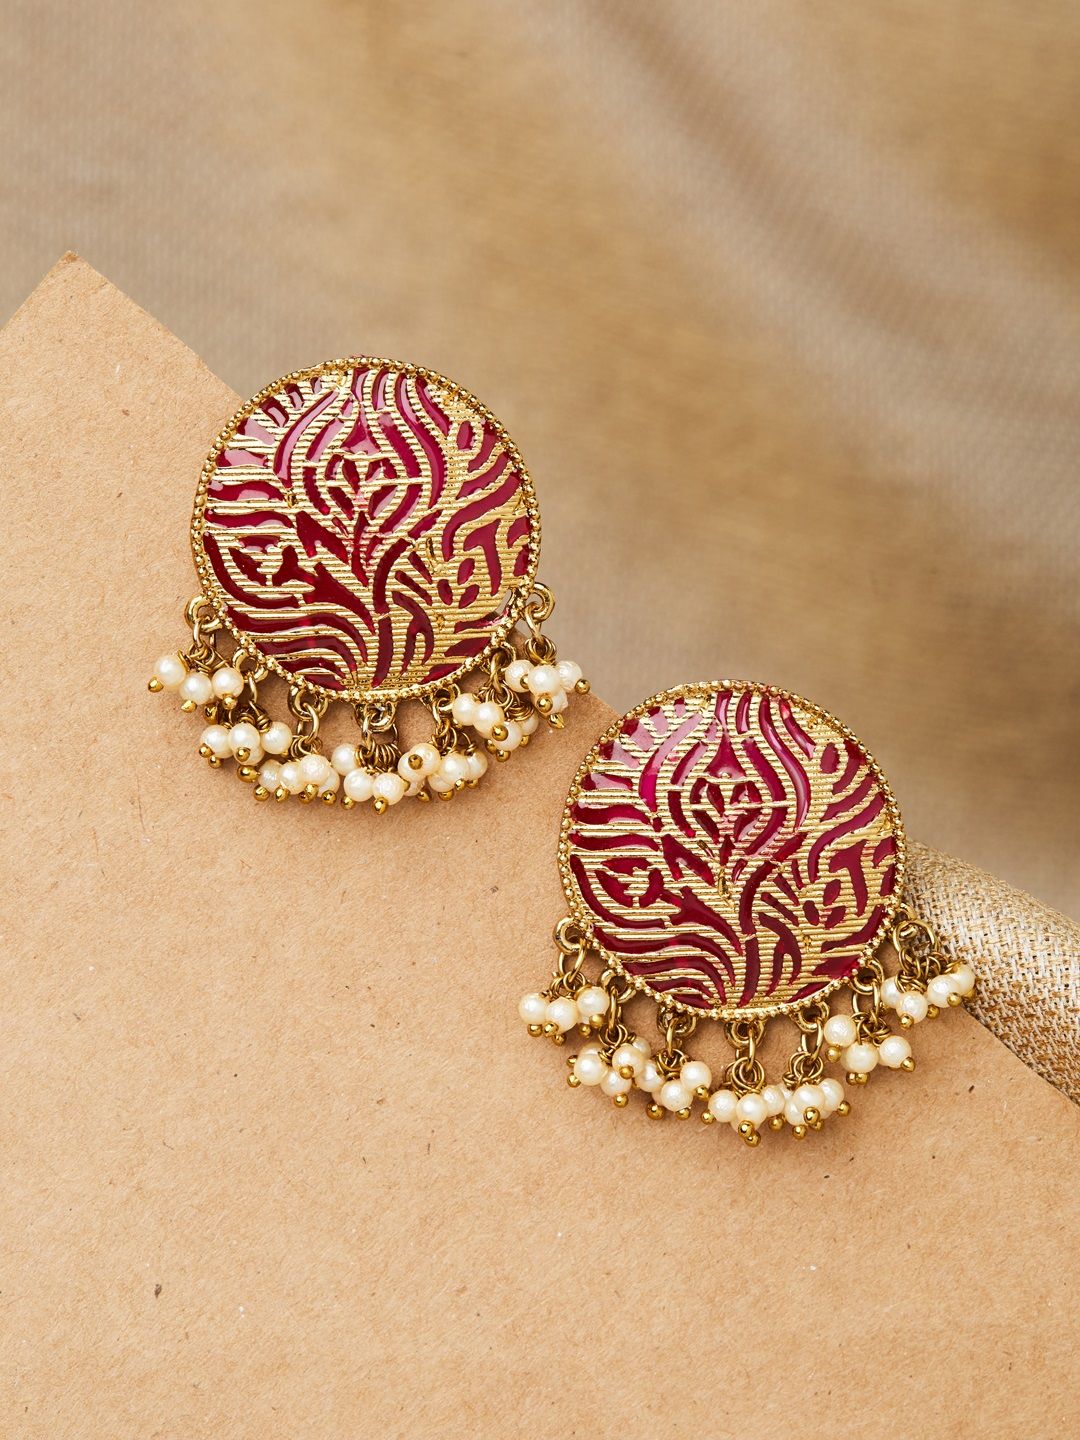 Details more than 77 red stone earrings in gold best - esthdonghoadian